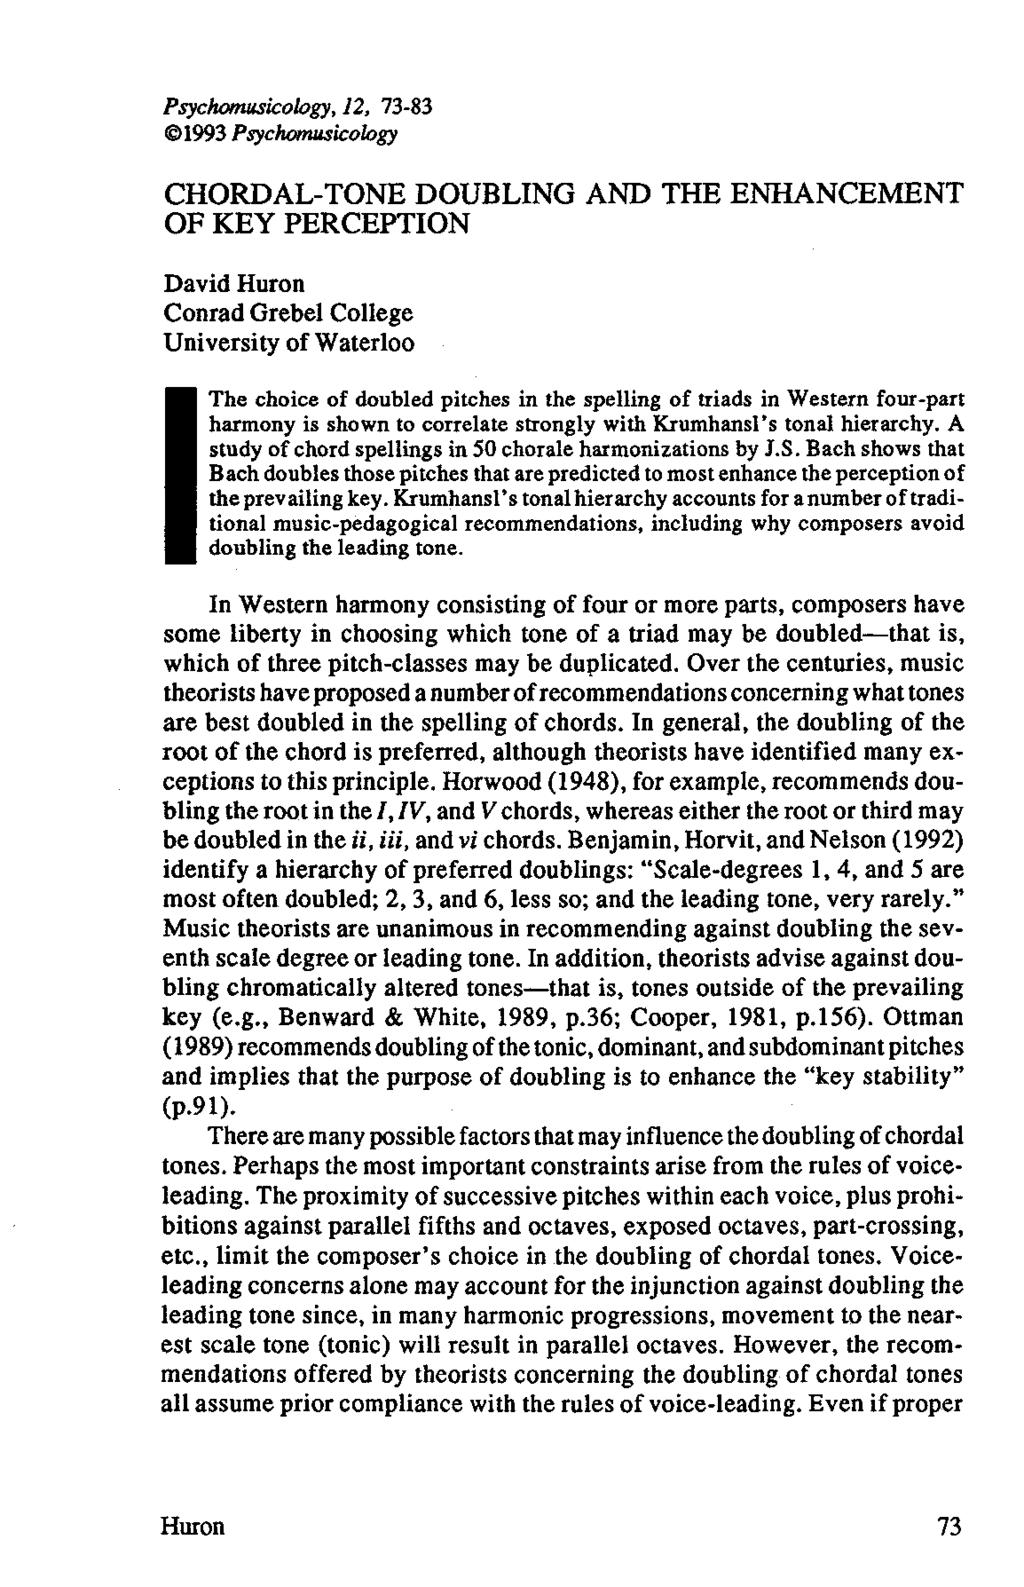 Psychomusicology, 12, 73-83 1993 Psychomusicology CHORDAL-TONE DOUBLING AND THE ENHANCEMENT OF KEY PERCEPTION David Huron Conrad Grebel College University of Waterloo The choice of doubled pitches in